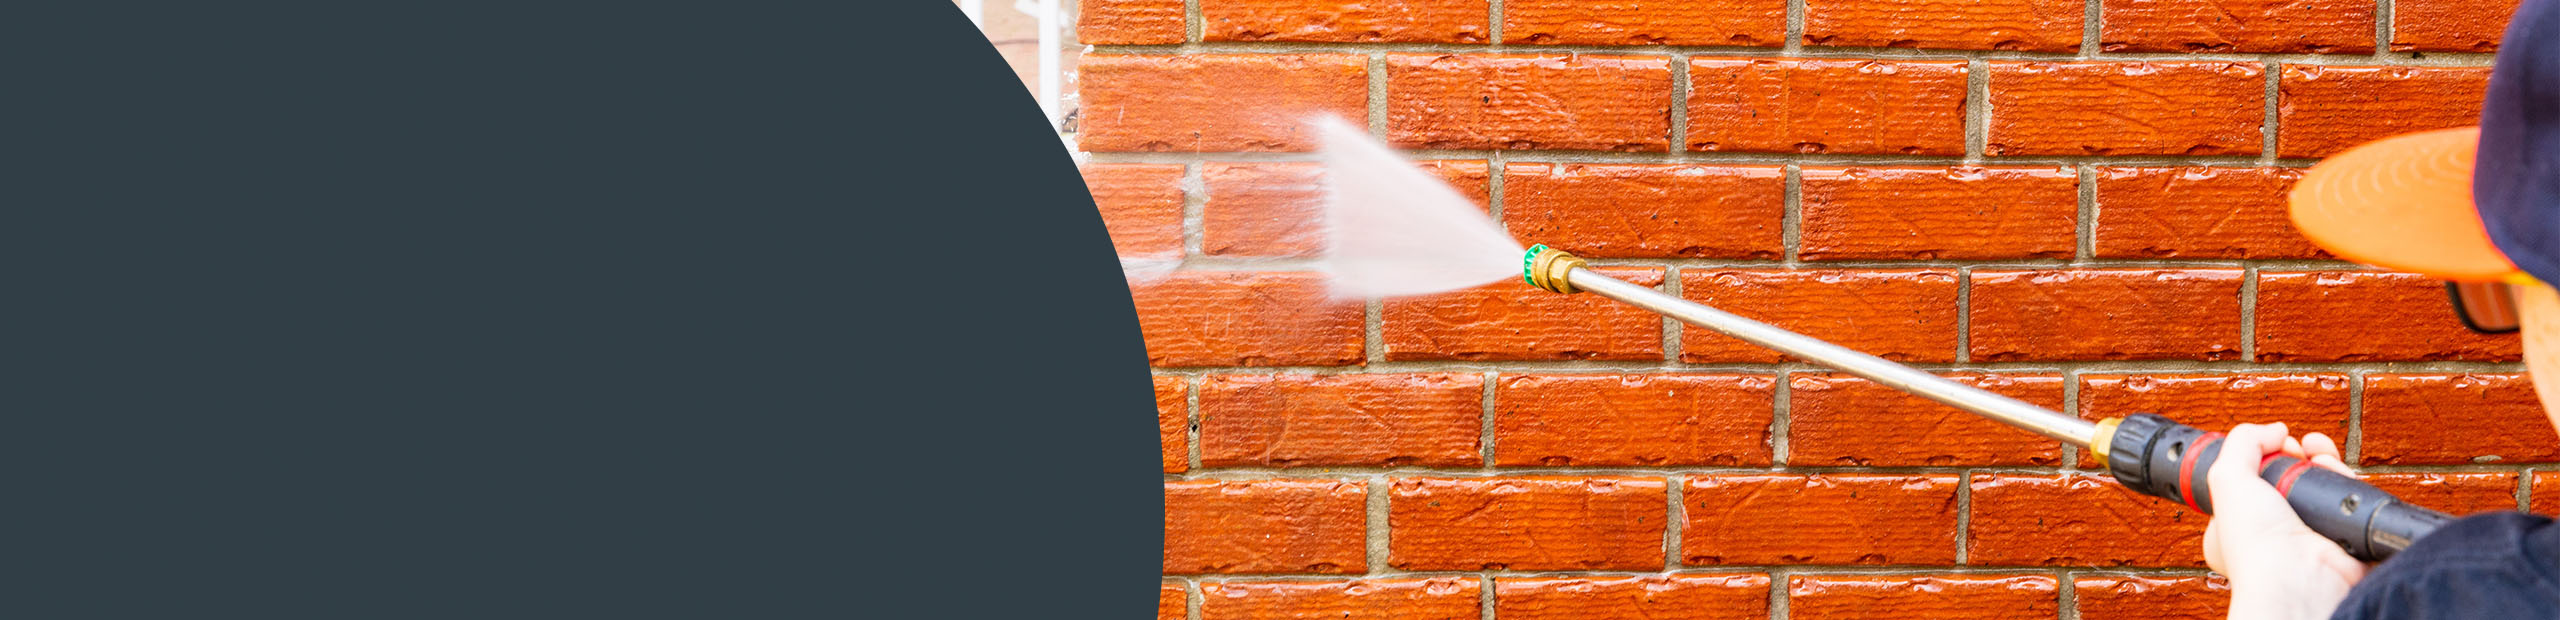 Brick Cleaning Services Swanley